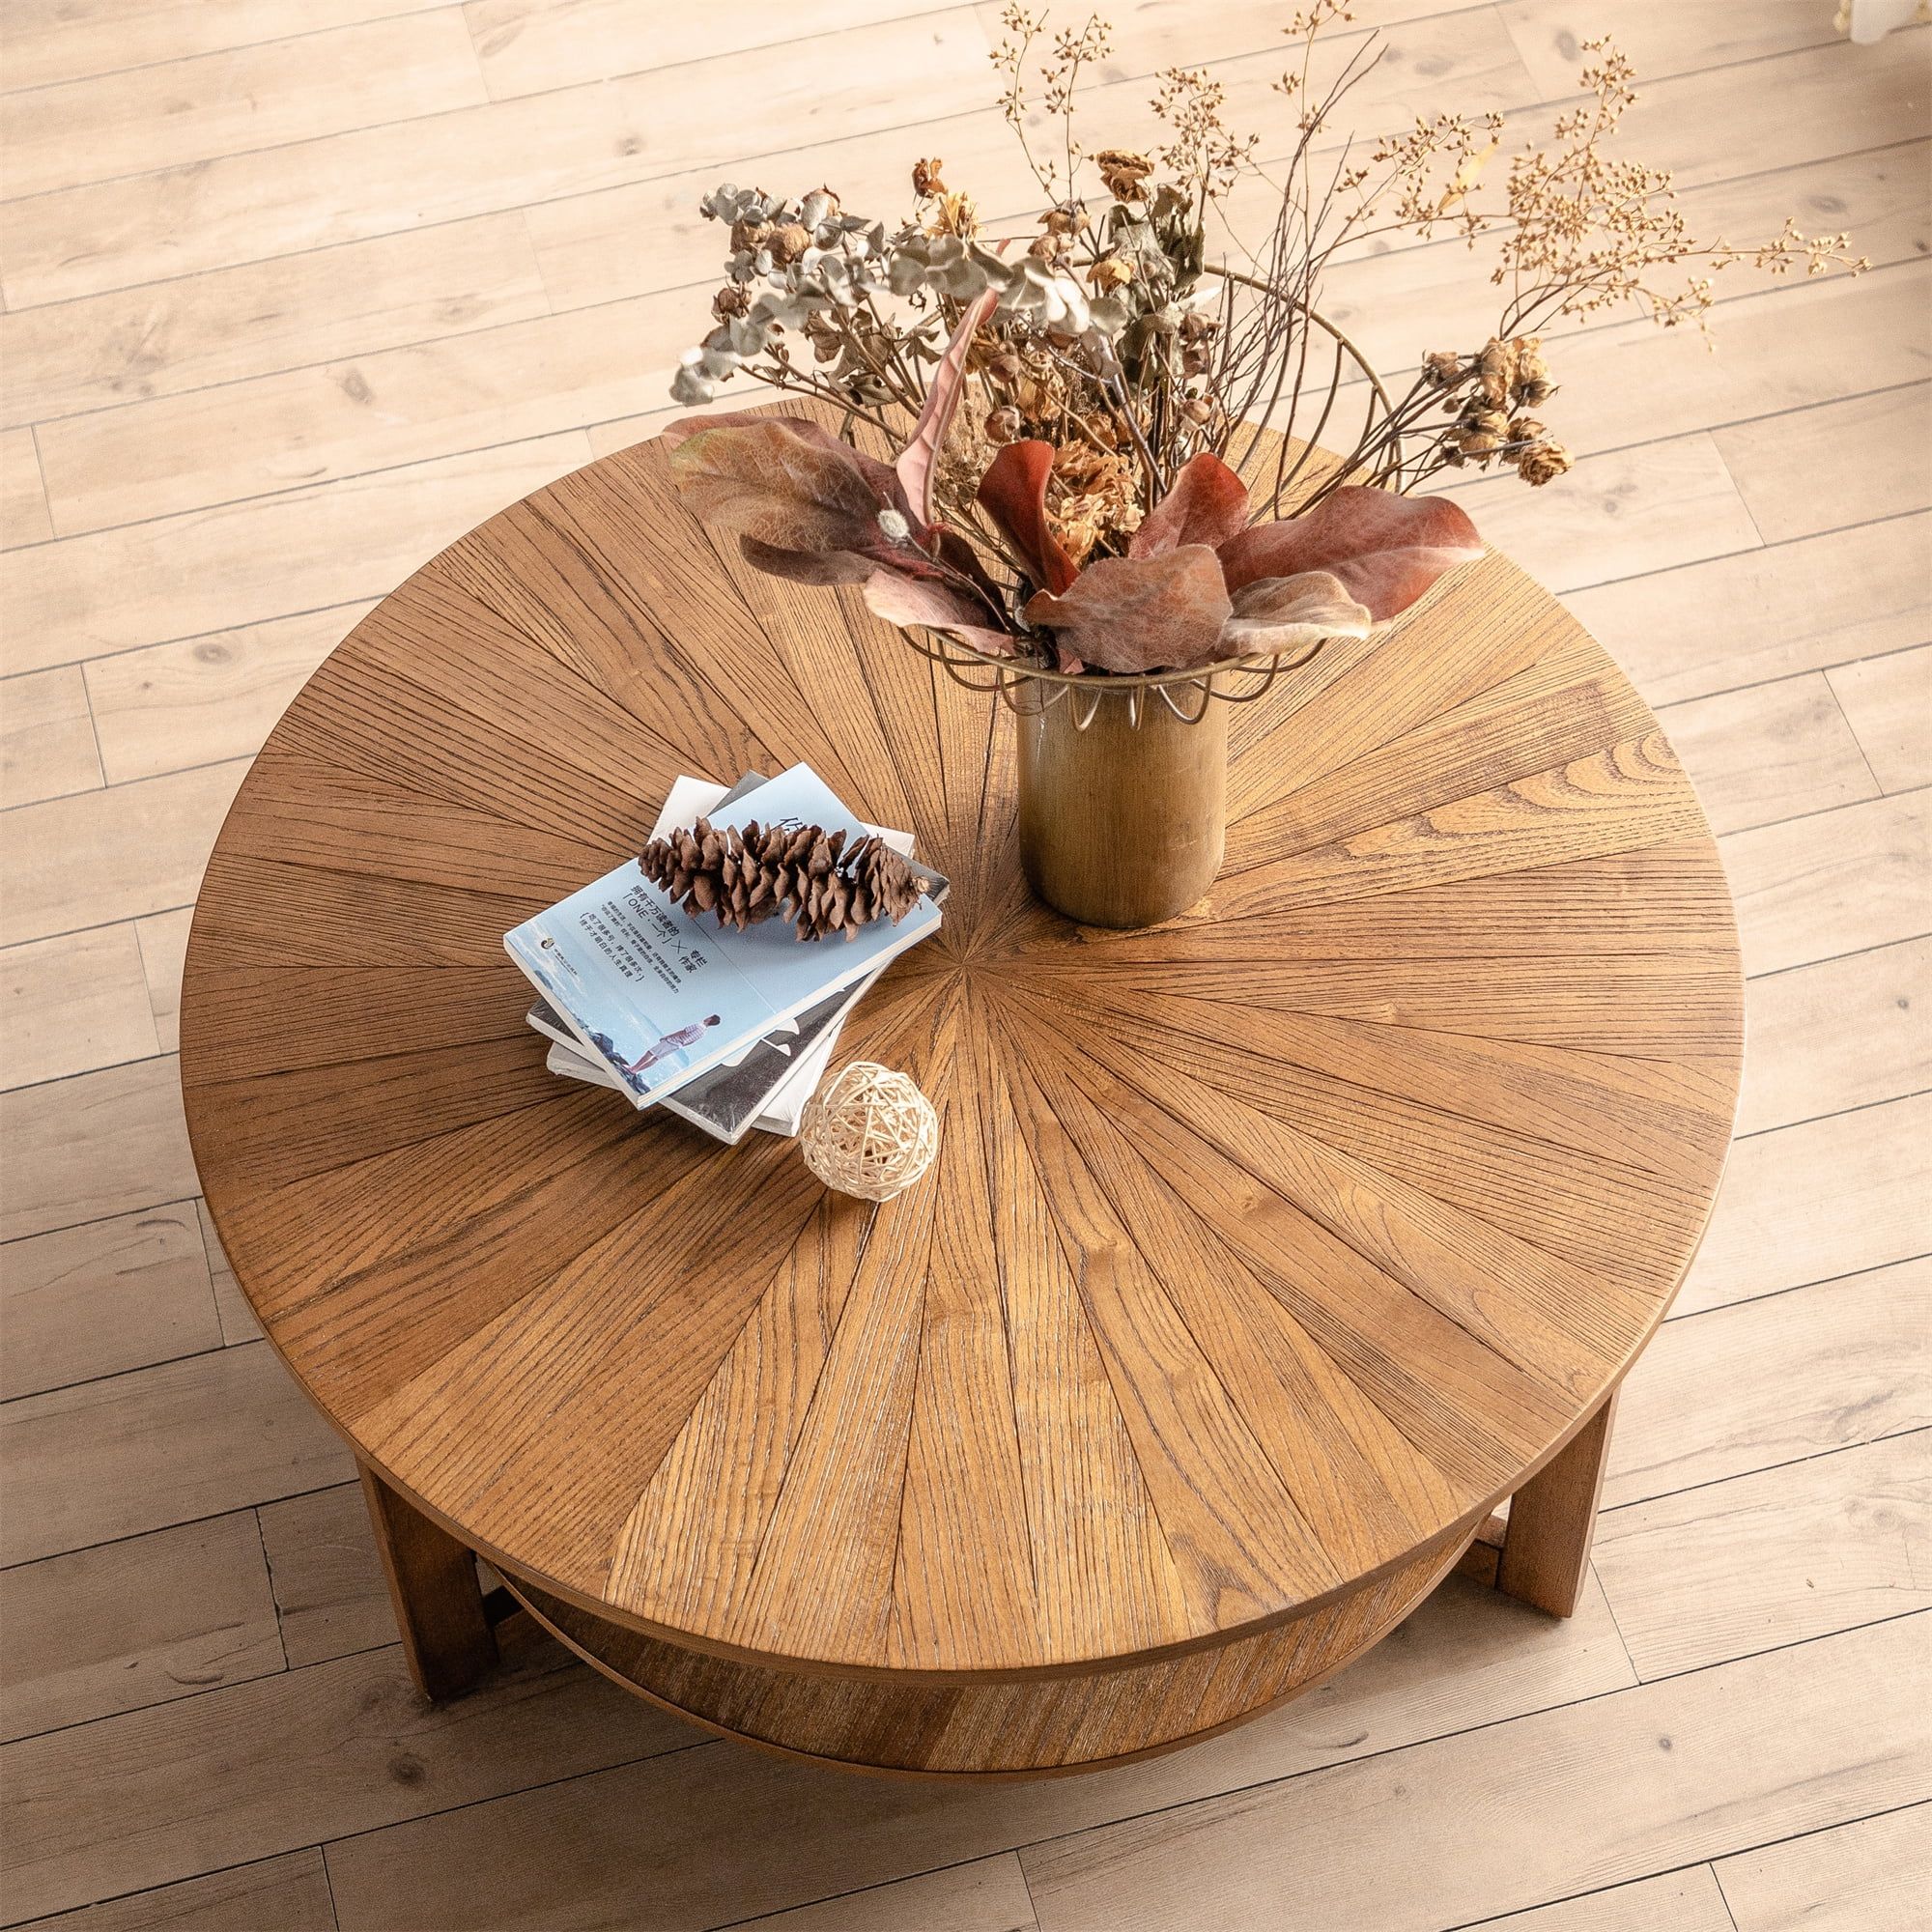 Gexpusm Round Coffee Table, Rustic Wood Coffee Table With Storage Shelf For  Living Room Bedroom, Brown Circle Coffee Table – Walmart For Rustic Wood Coffee Tables (View 6 of 15)